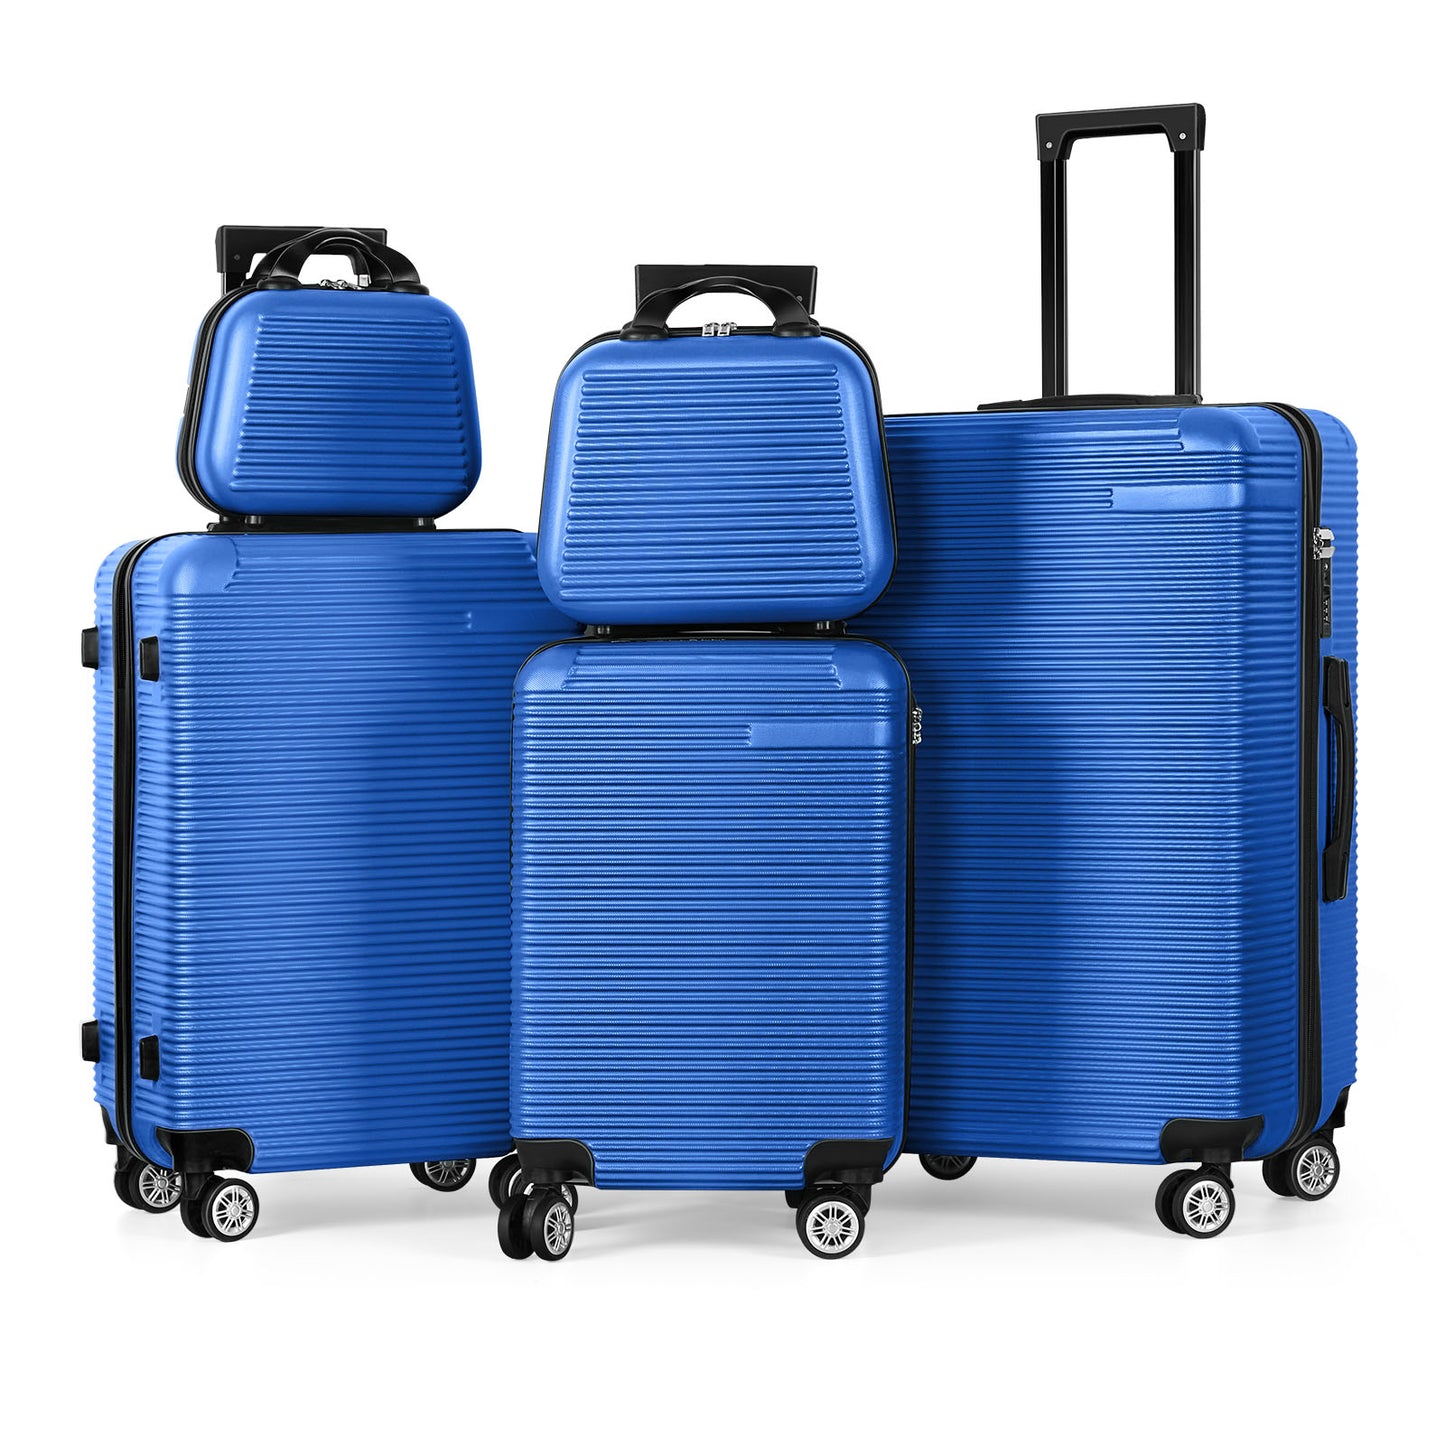 5-Piece ABS Luggage Set with TSA Lock, Includes 12",14",20", 24" & 28"